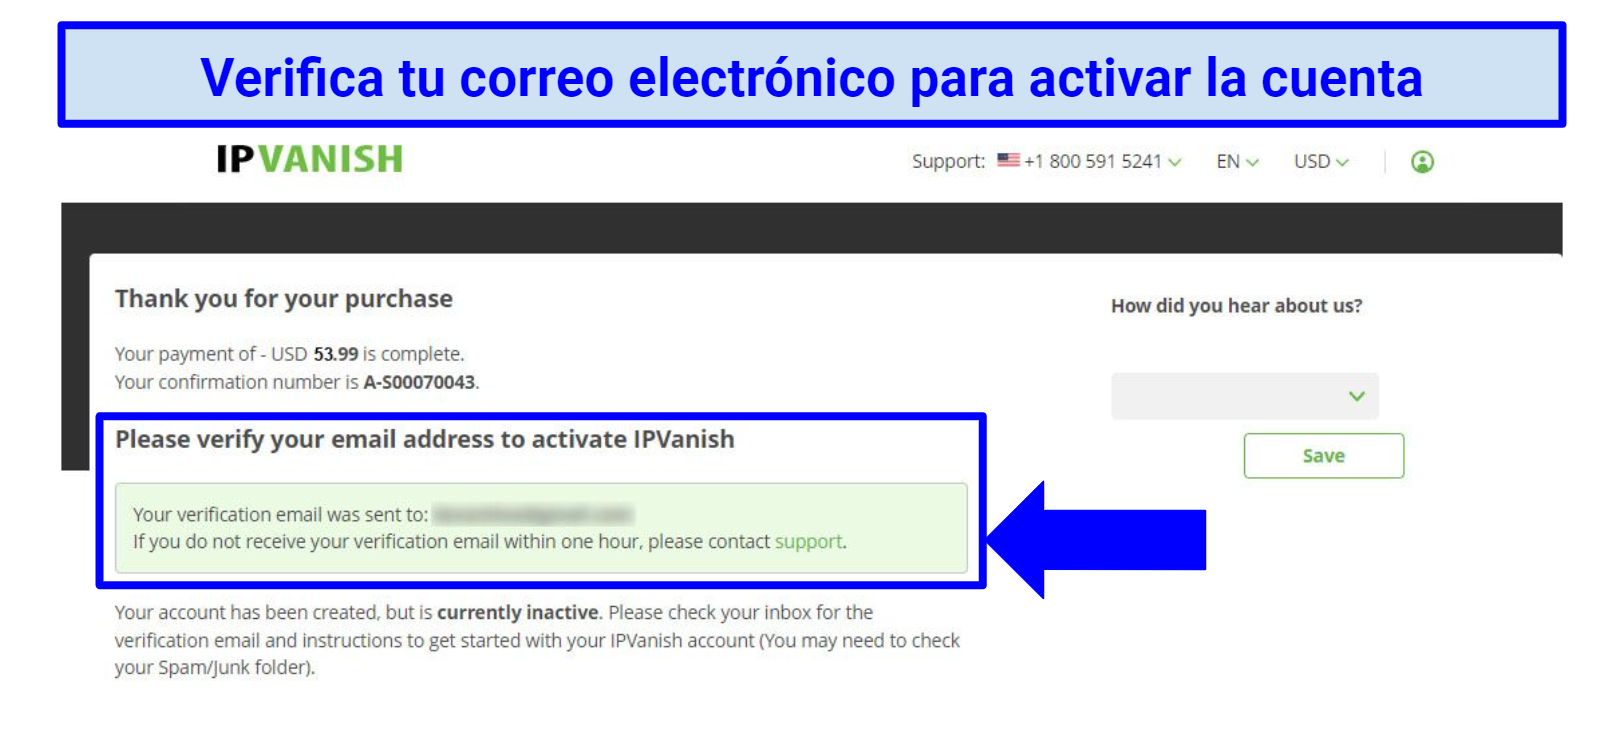 Screenshot showing the IPVanish payment confirmation page